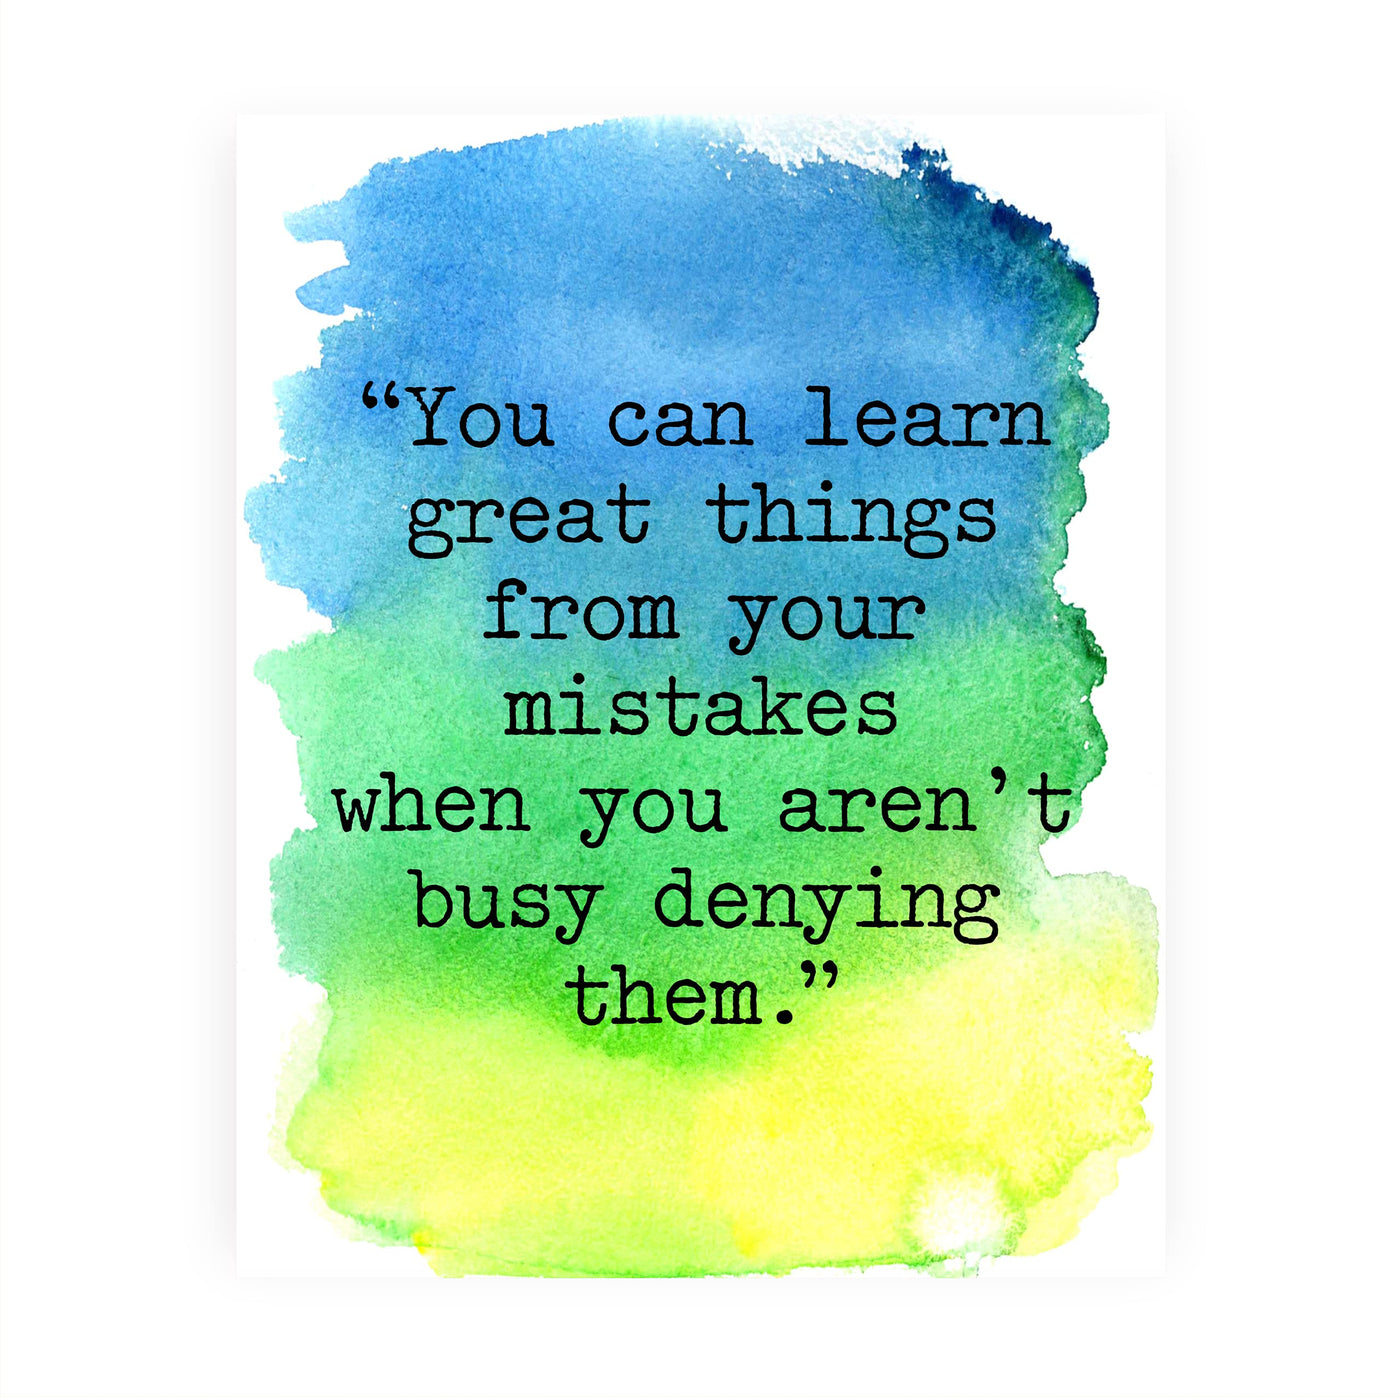 You Can Learn Great Things From Your Mistakes Motivational Wall Art Decor -8 x 10" Inspirational Typography Print -Ready to Frame. Perfect Decoration for Home-Office-Work. Great Gift of Motivation!